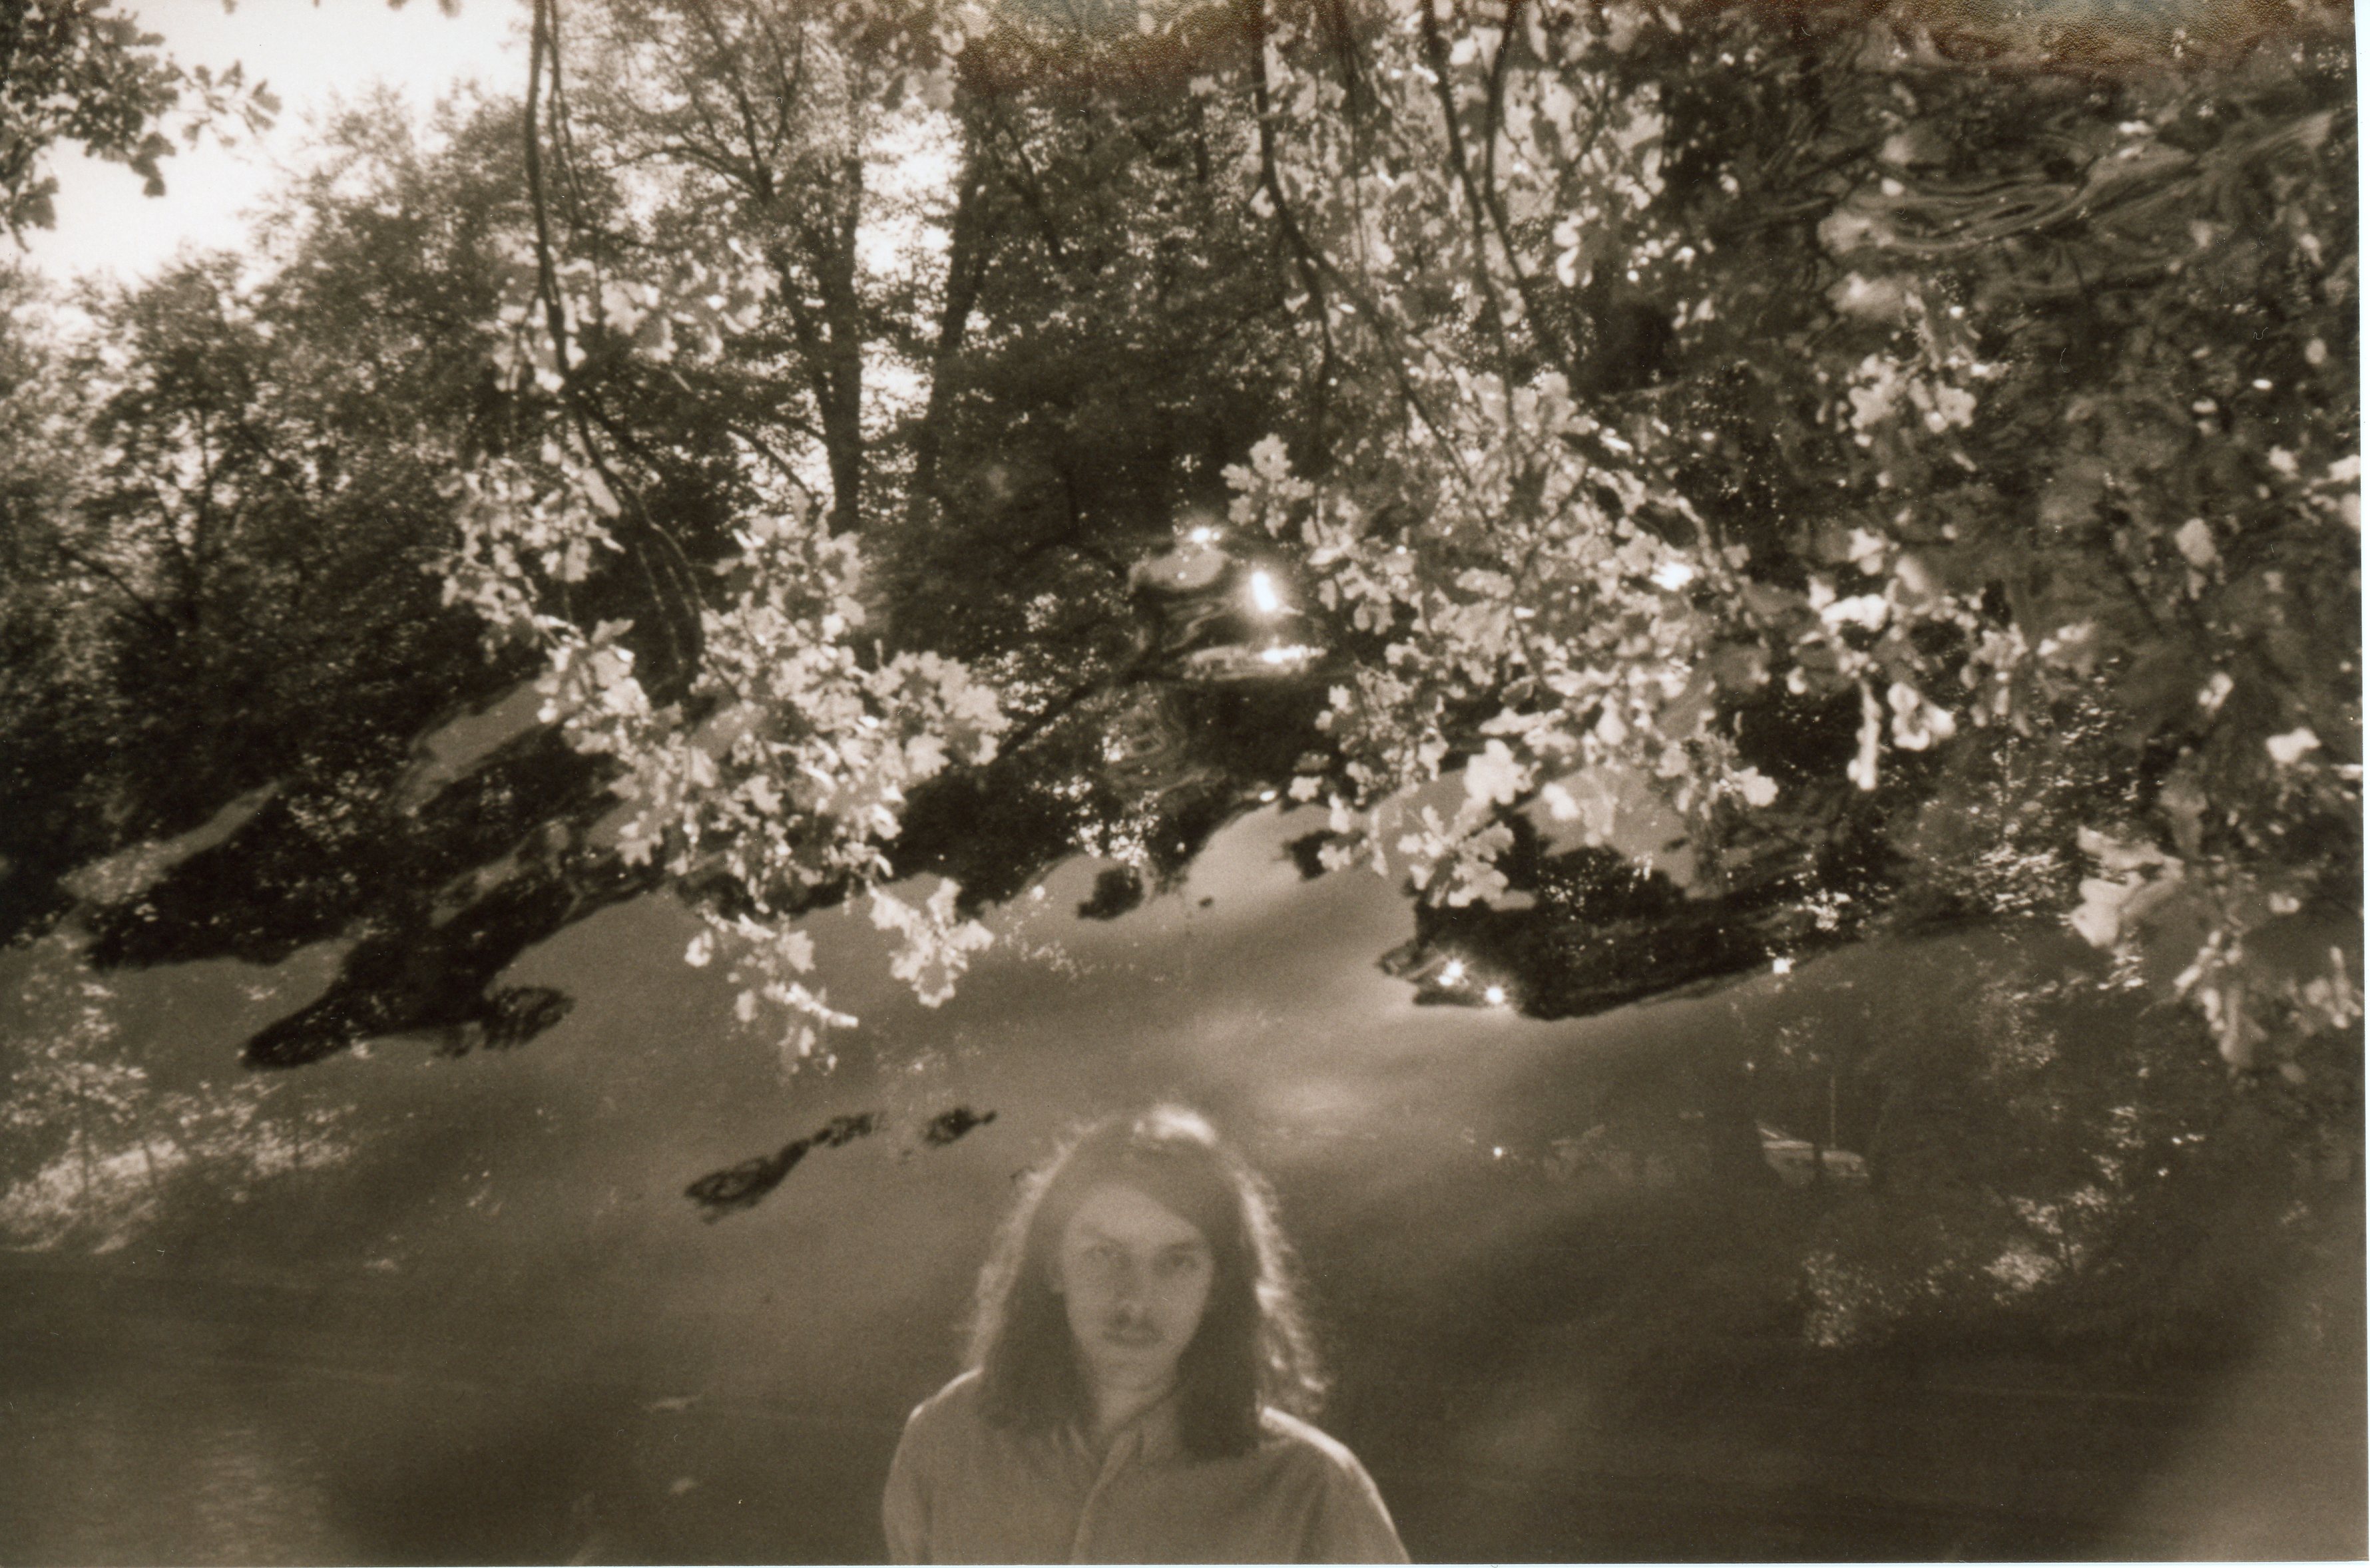 a black and white, sepia toned, 35mm print; the image is a hectic double exposure: one image is the surface of the water with faint ripples and sunlight on the surface reflected through trees; the other image shows a man looking at the camera in the center of the frame at the bottom, his head and shoulders visible; he stands in front of a canal with trees growing behind it